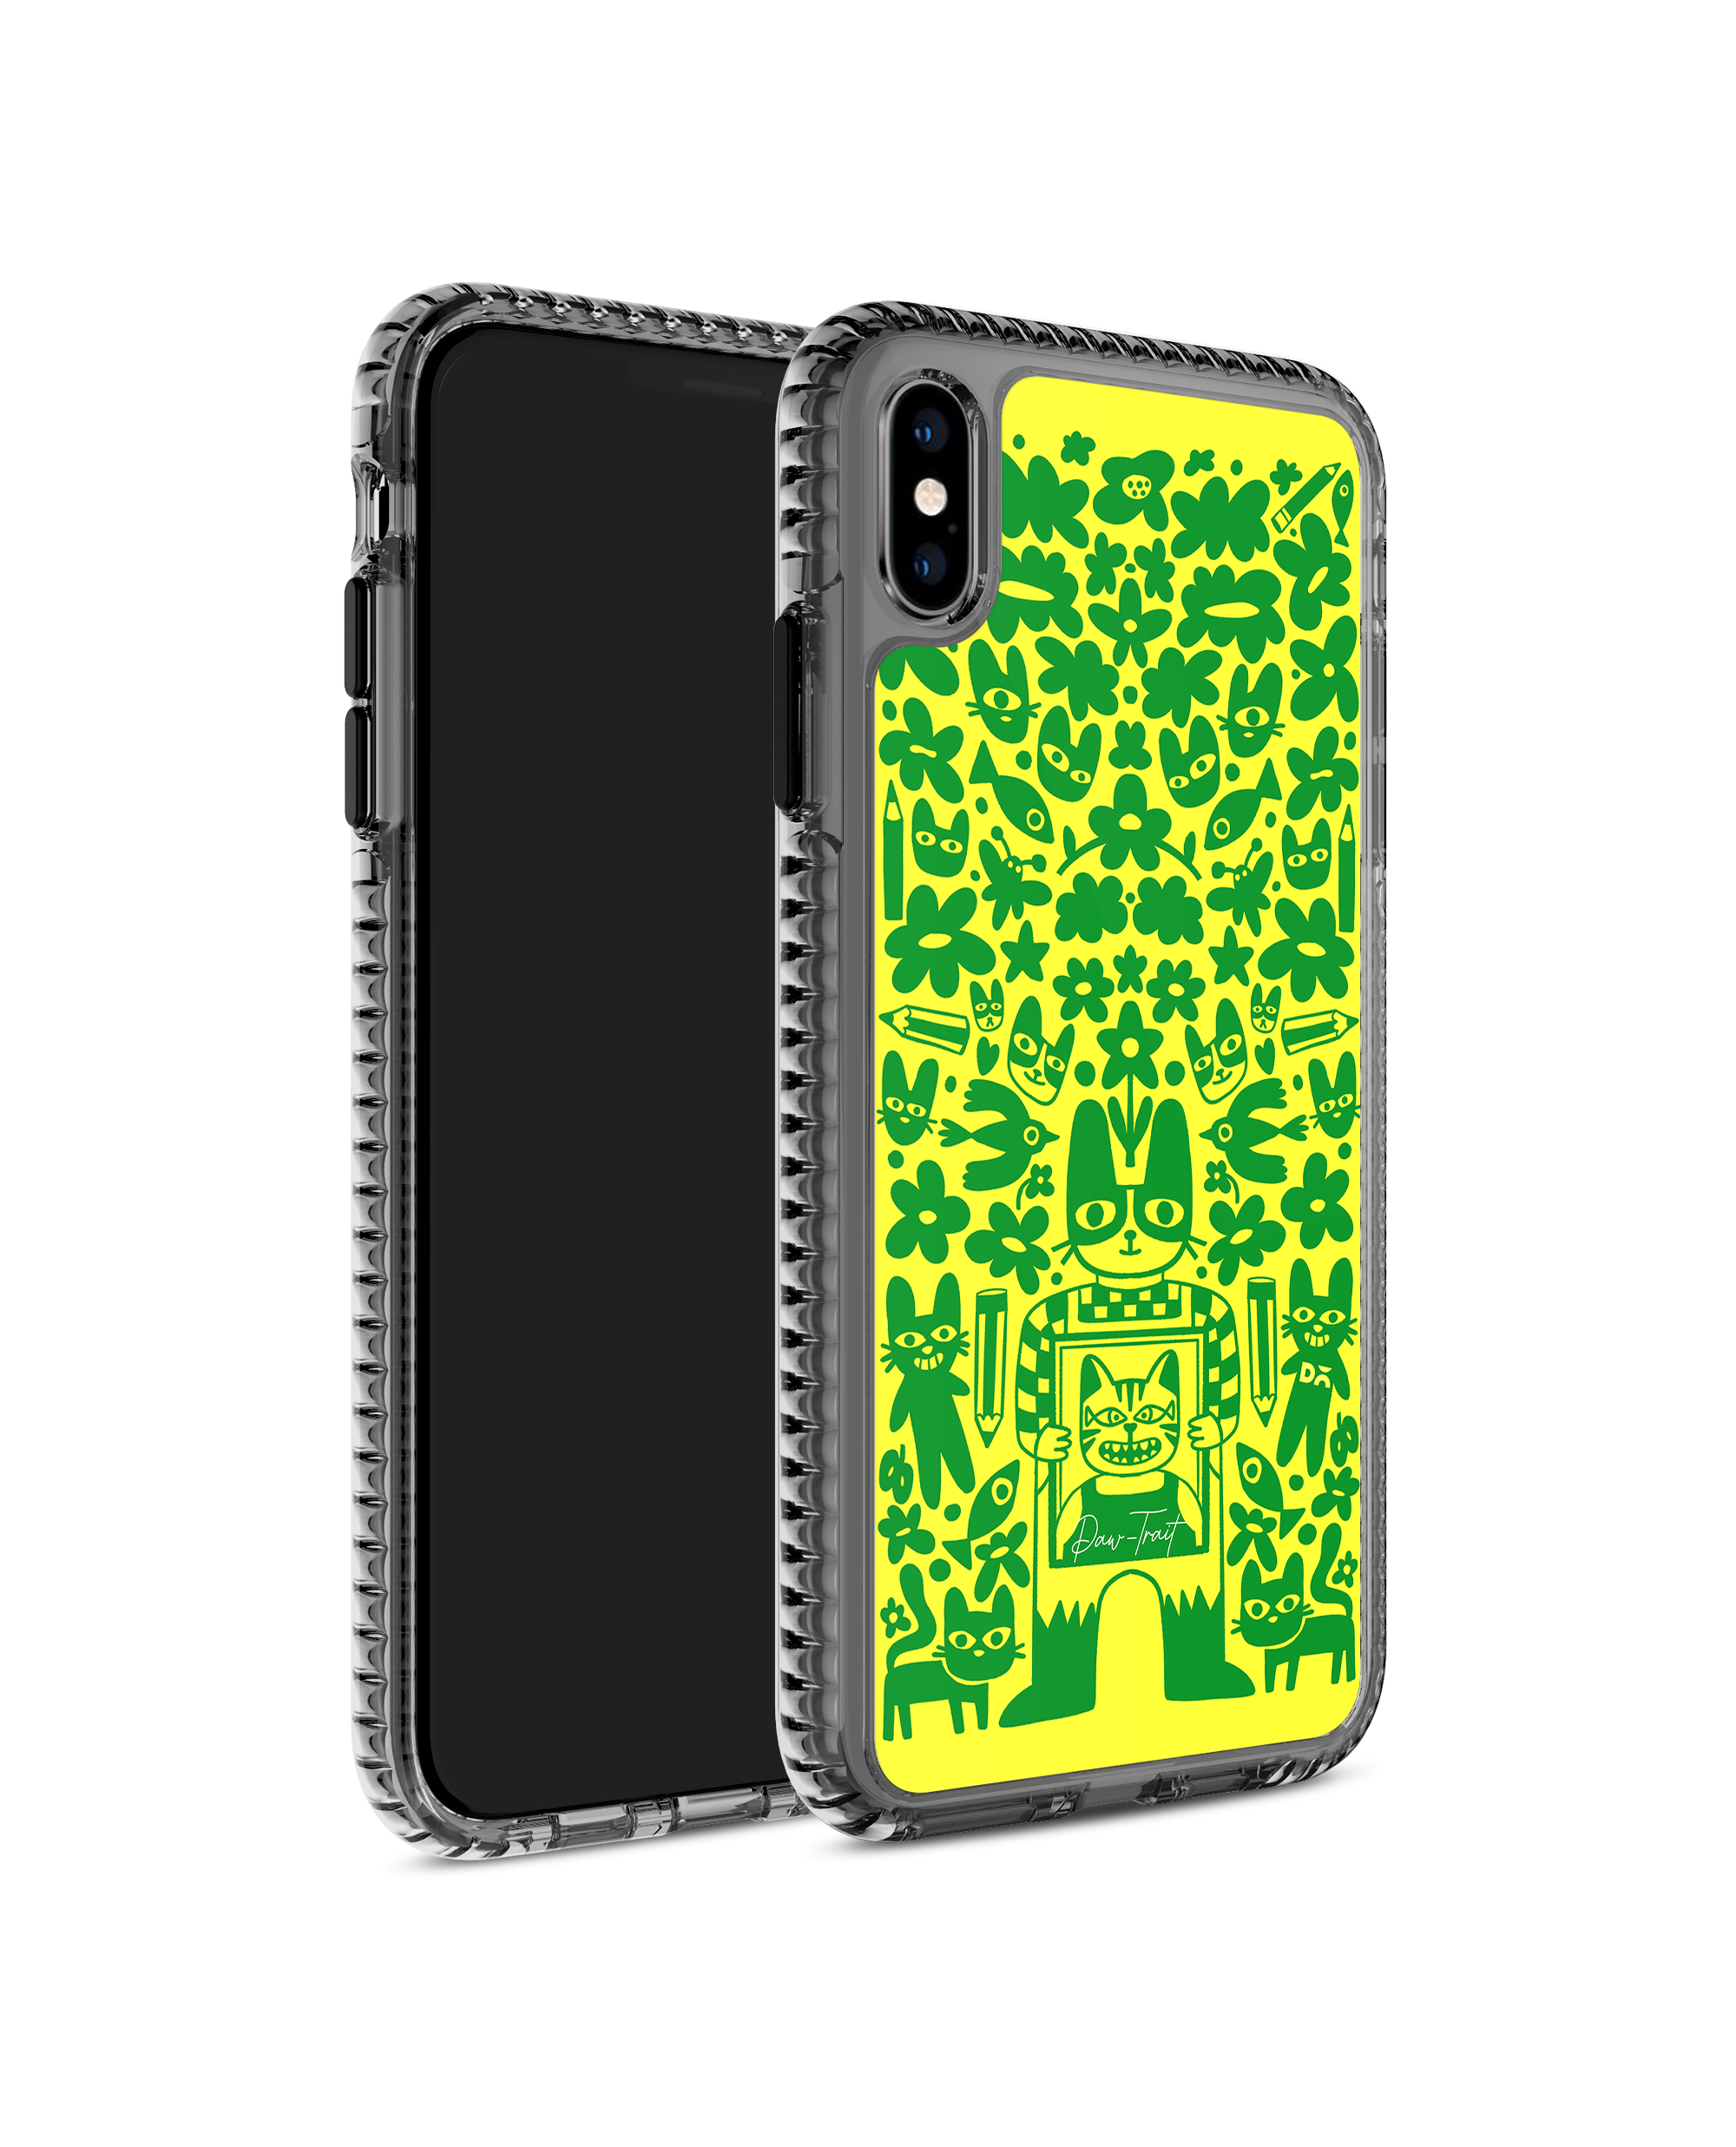 Sketch iPhone Cases for Sale  Redbubble